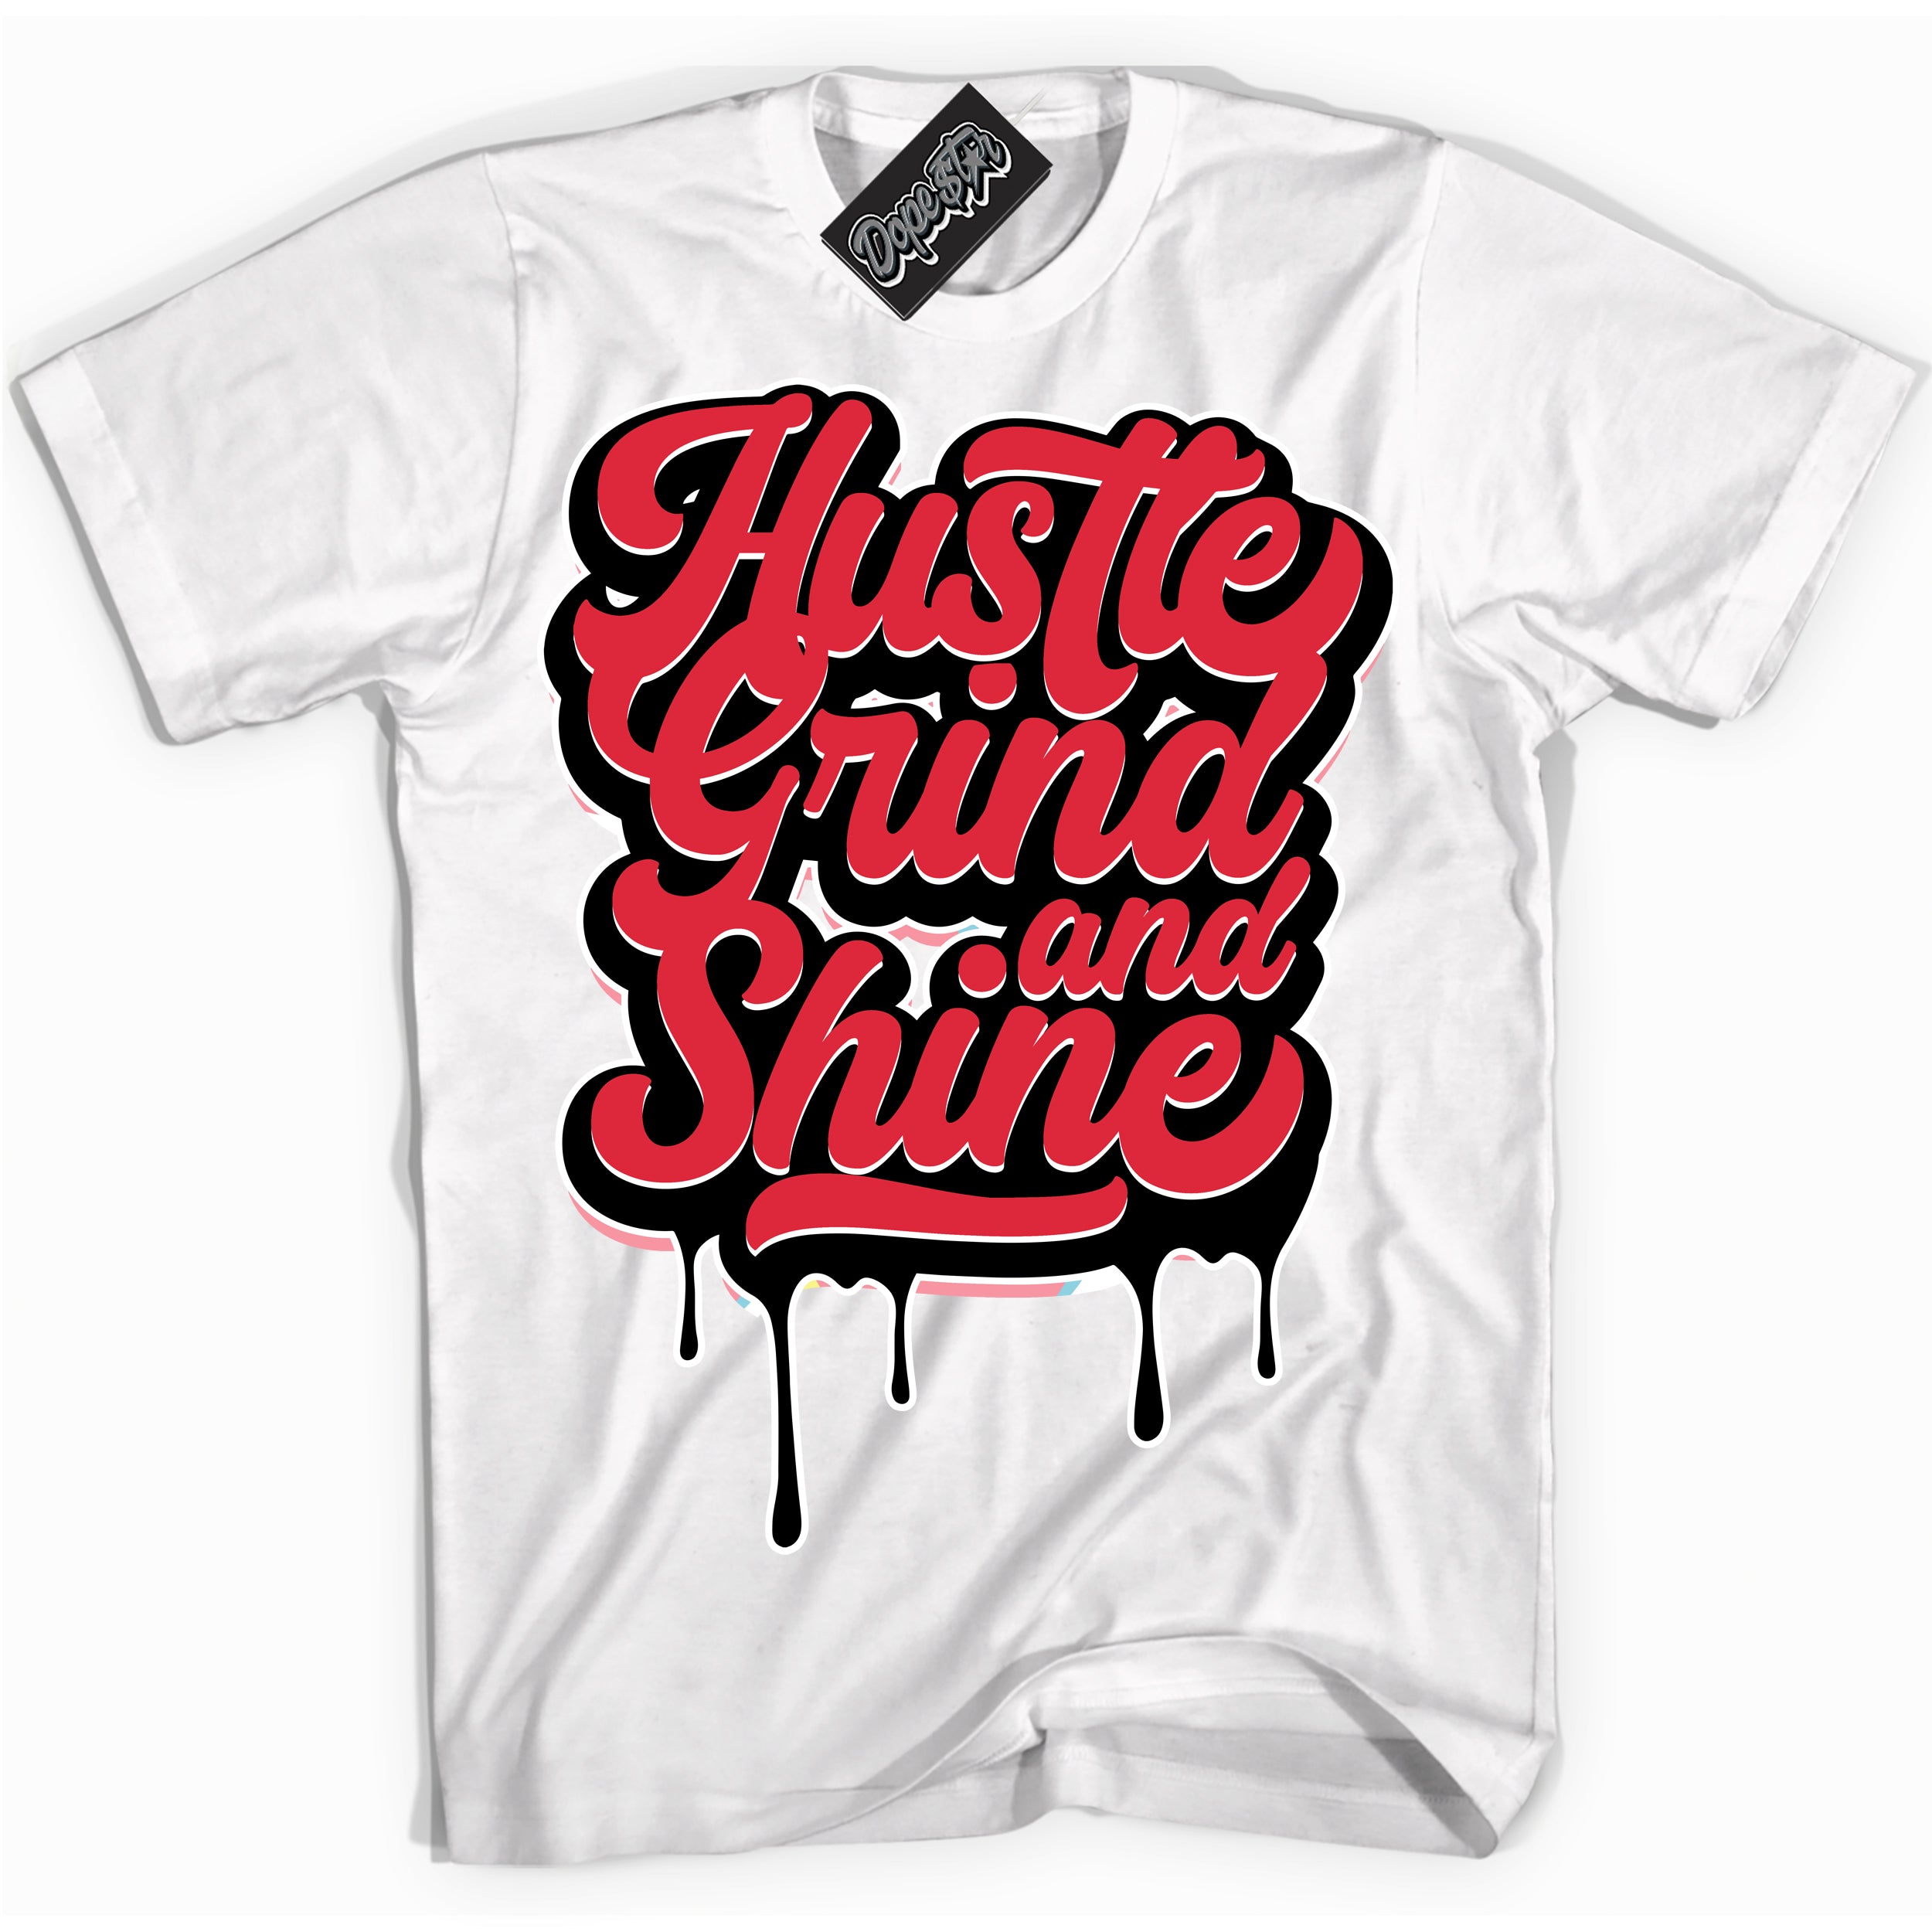 Cool White graphic tee with “ Hustle Grind And Shine ” design, that perfectly matches Spider-Verse 1s sneakers 